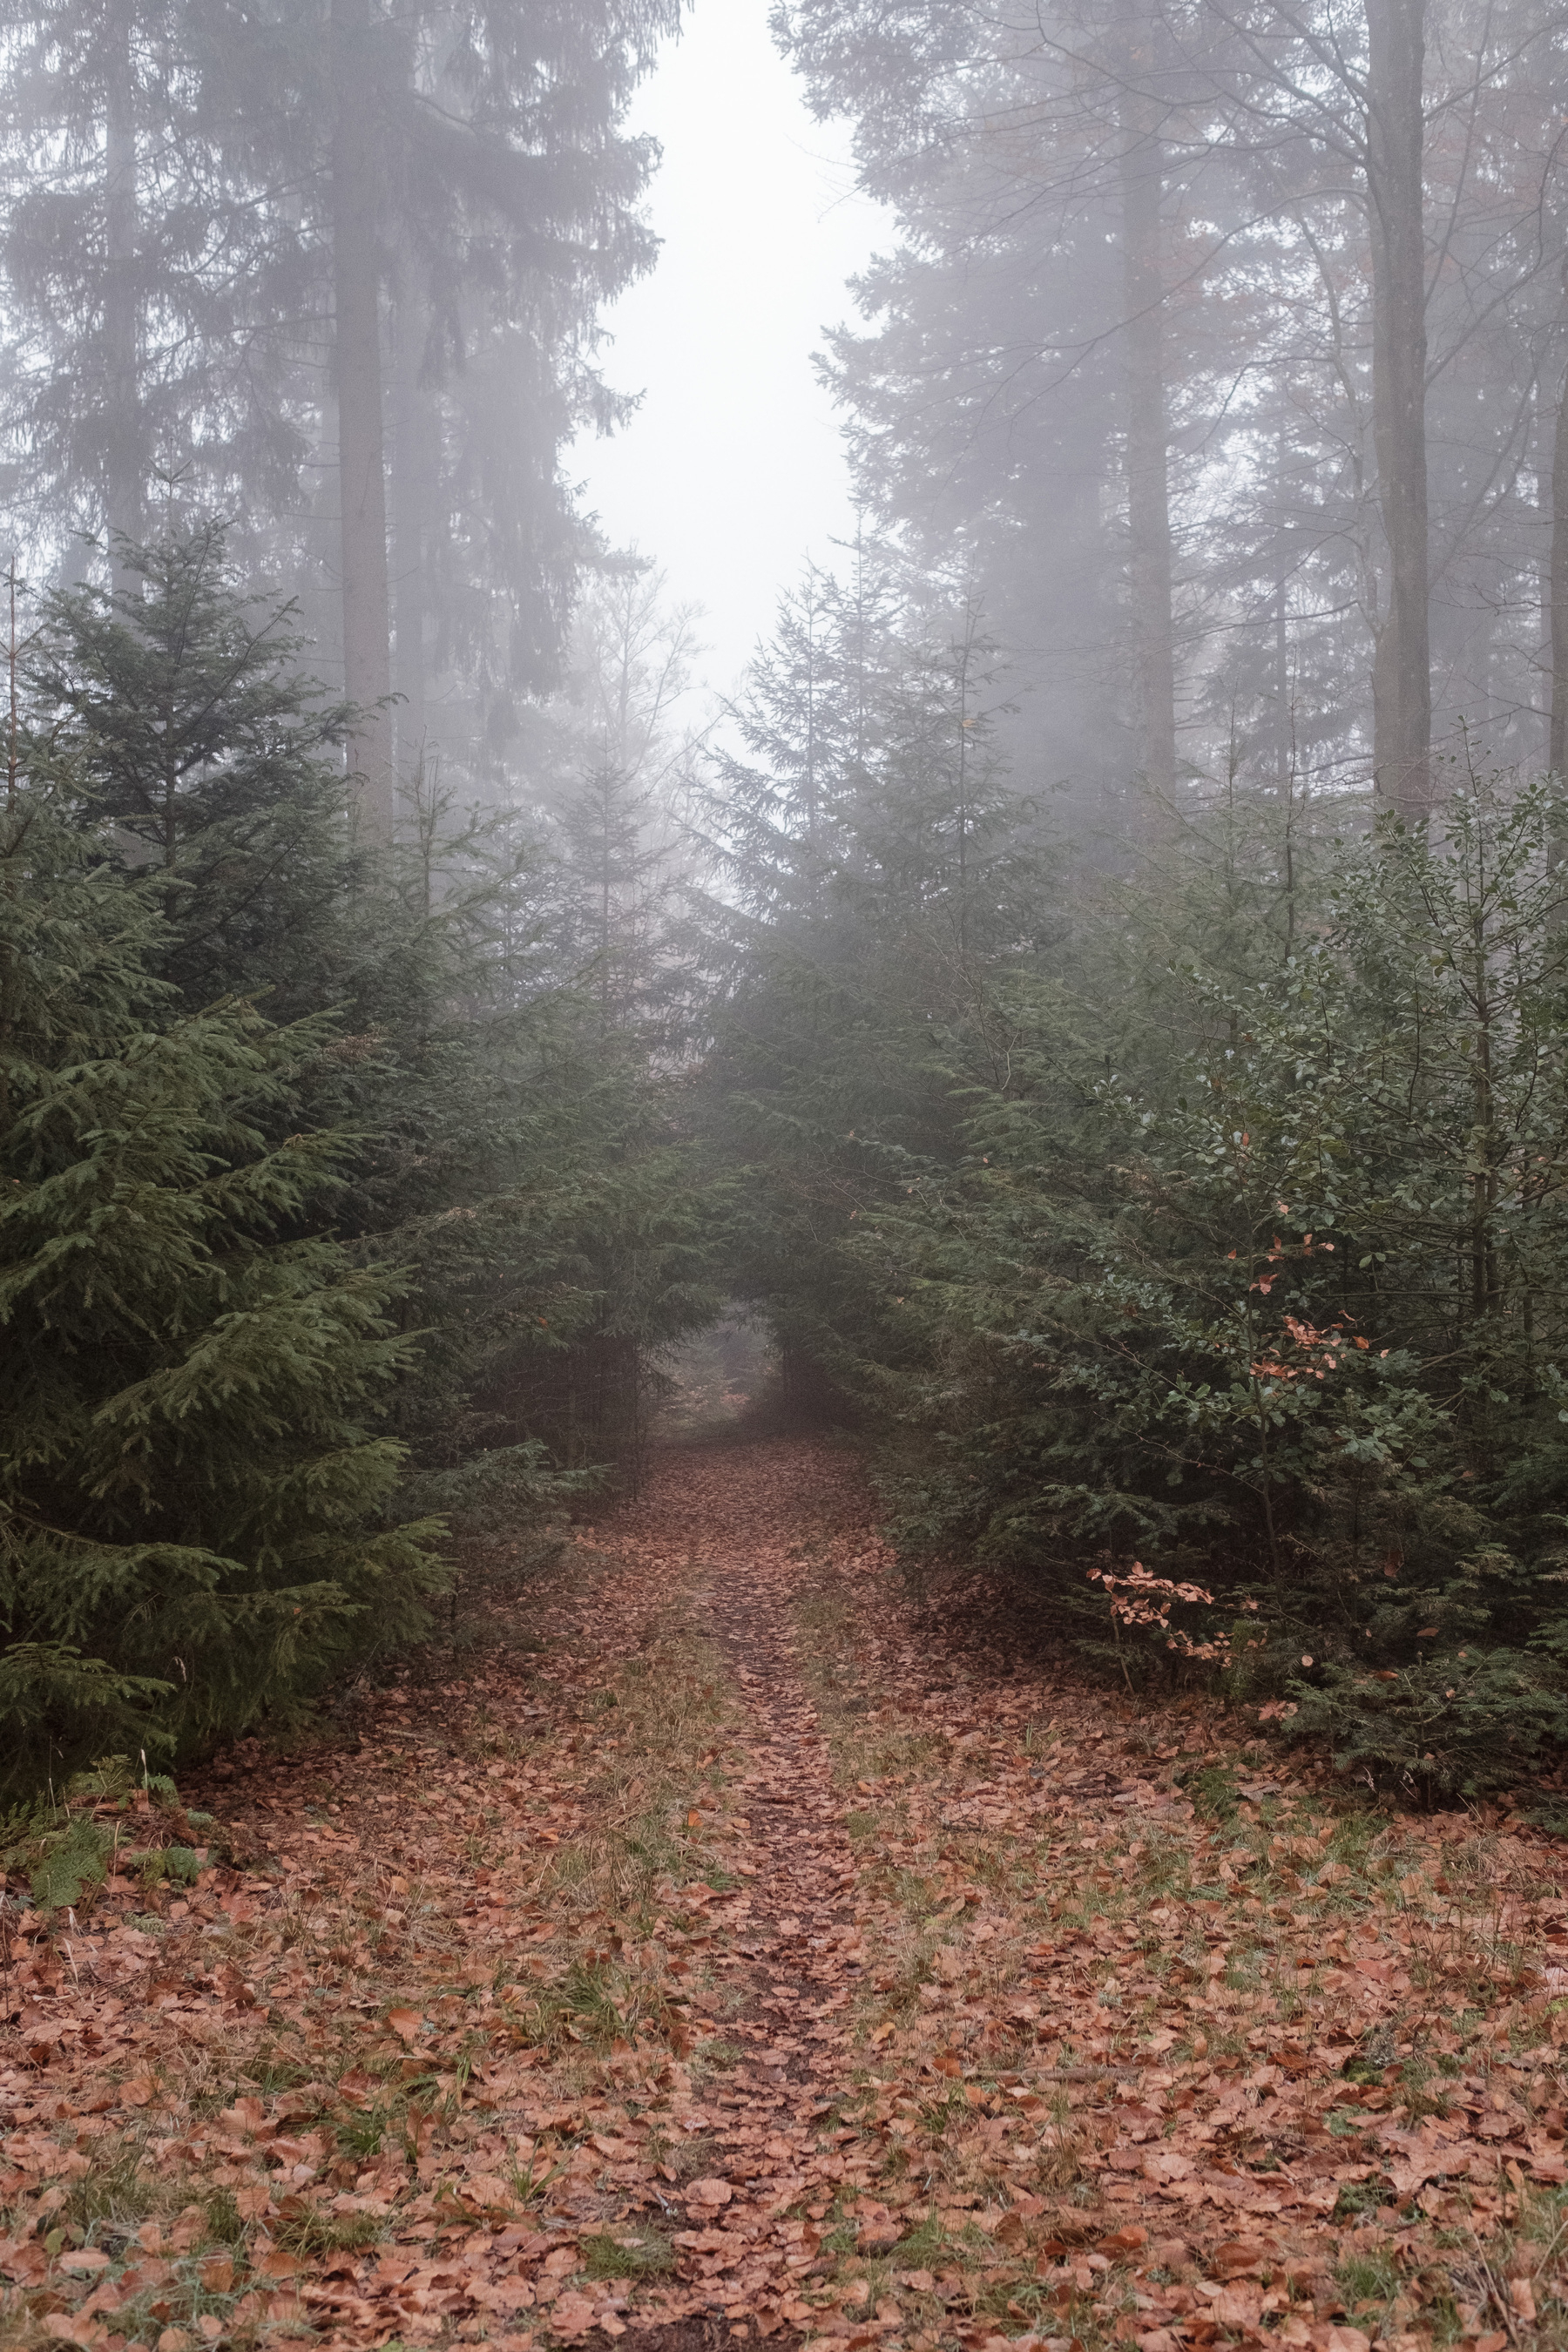 A path covered in brown leaves stretching into the distance. Coniferous trees, roughly 4 metres high flank the path as it disappears into mist in the distance. Higher trees are visibile in the background.